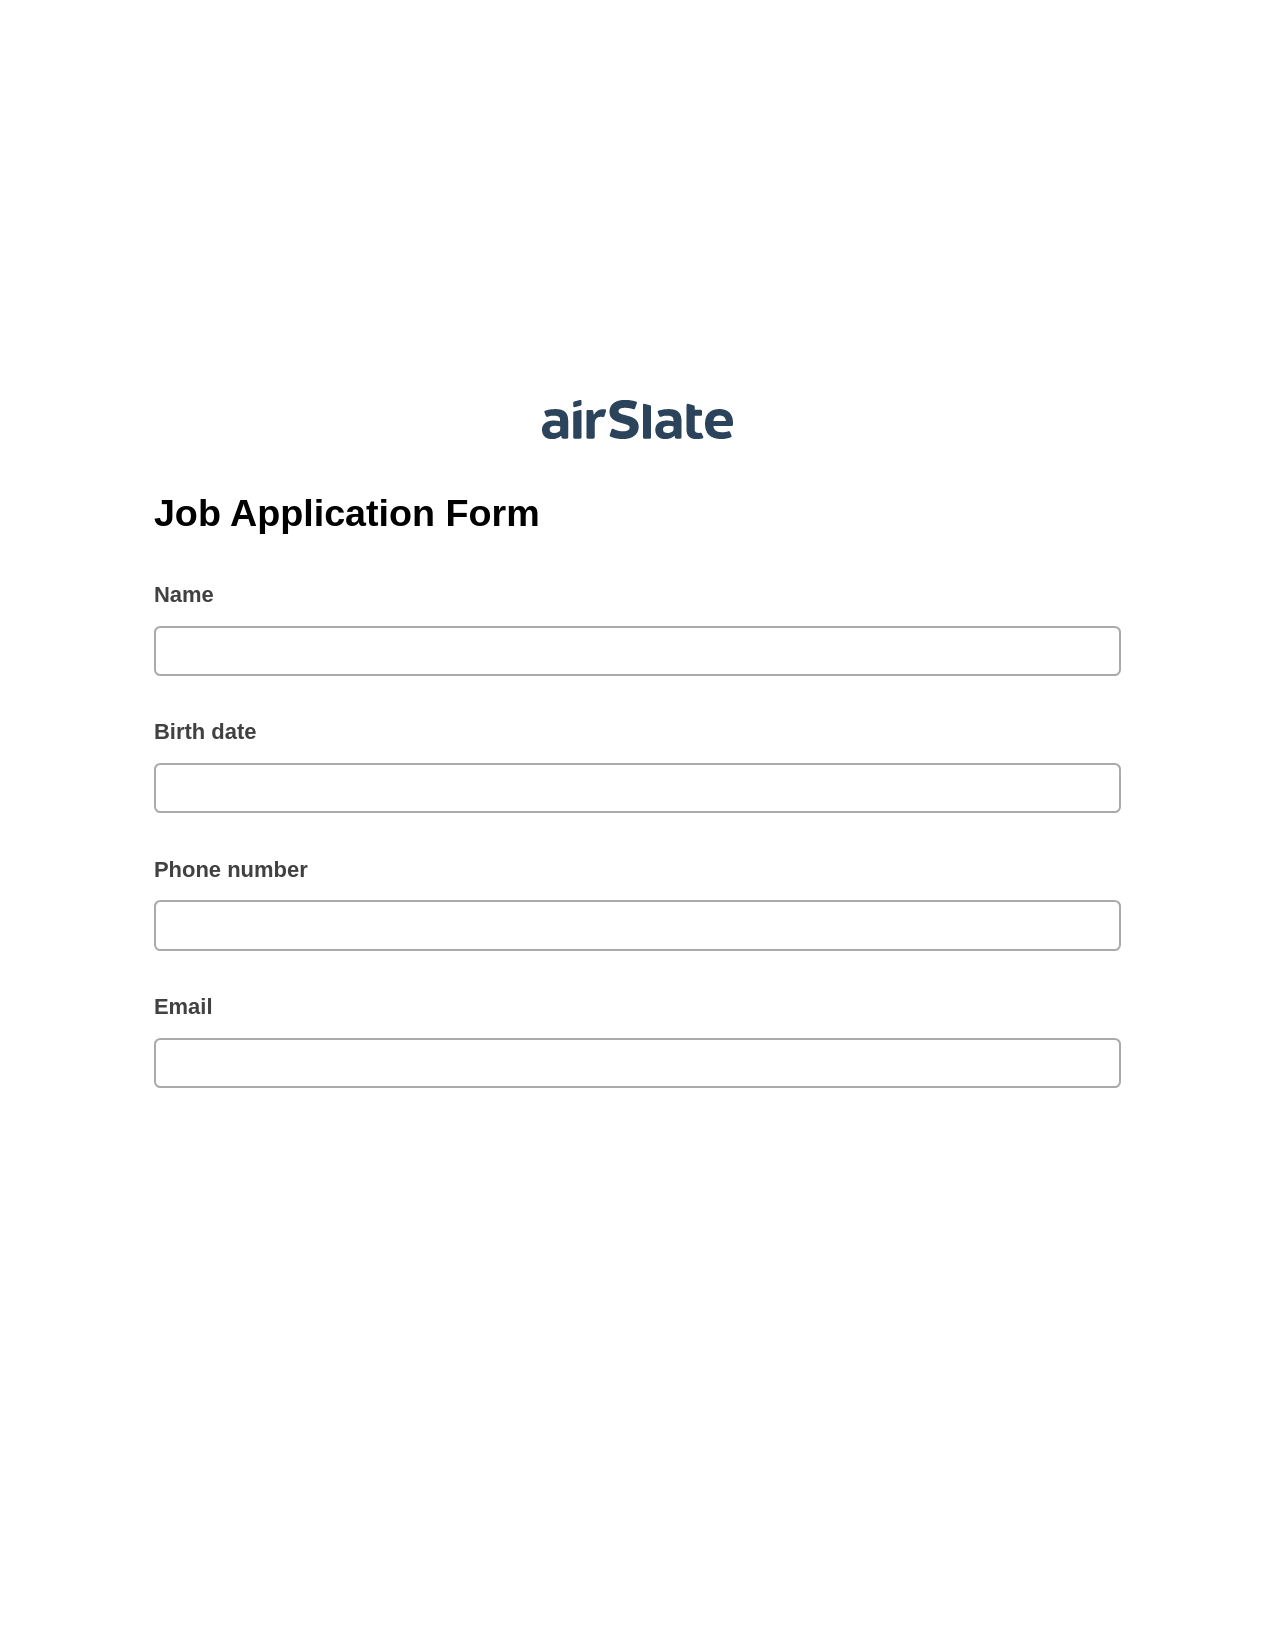 Multirole Job Application Form Pre-fill from NetSuite Records Bot, Create slate bot, Export to Excel 365 Bot